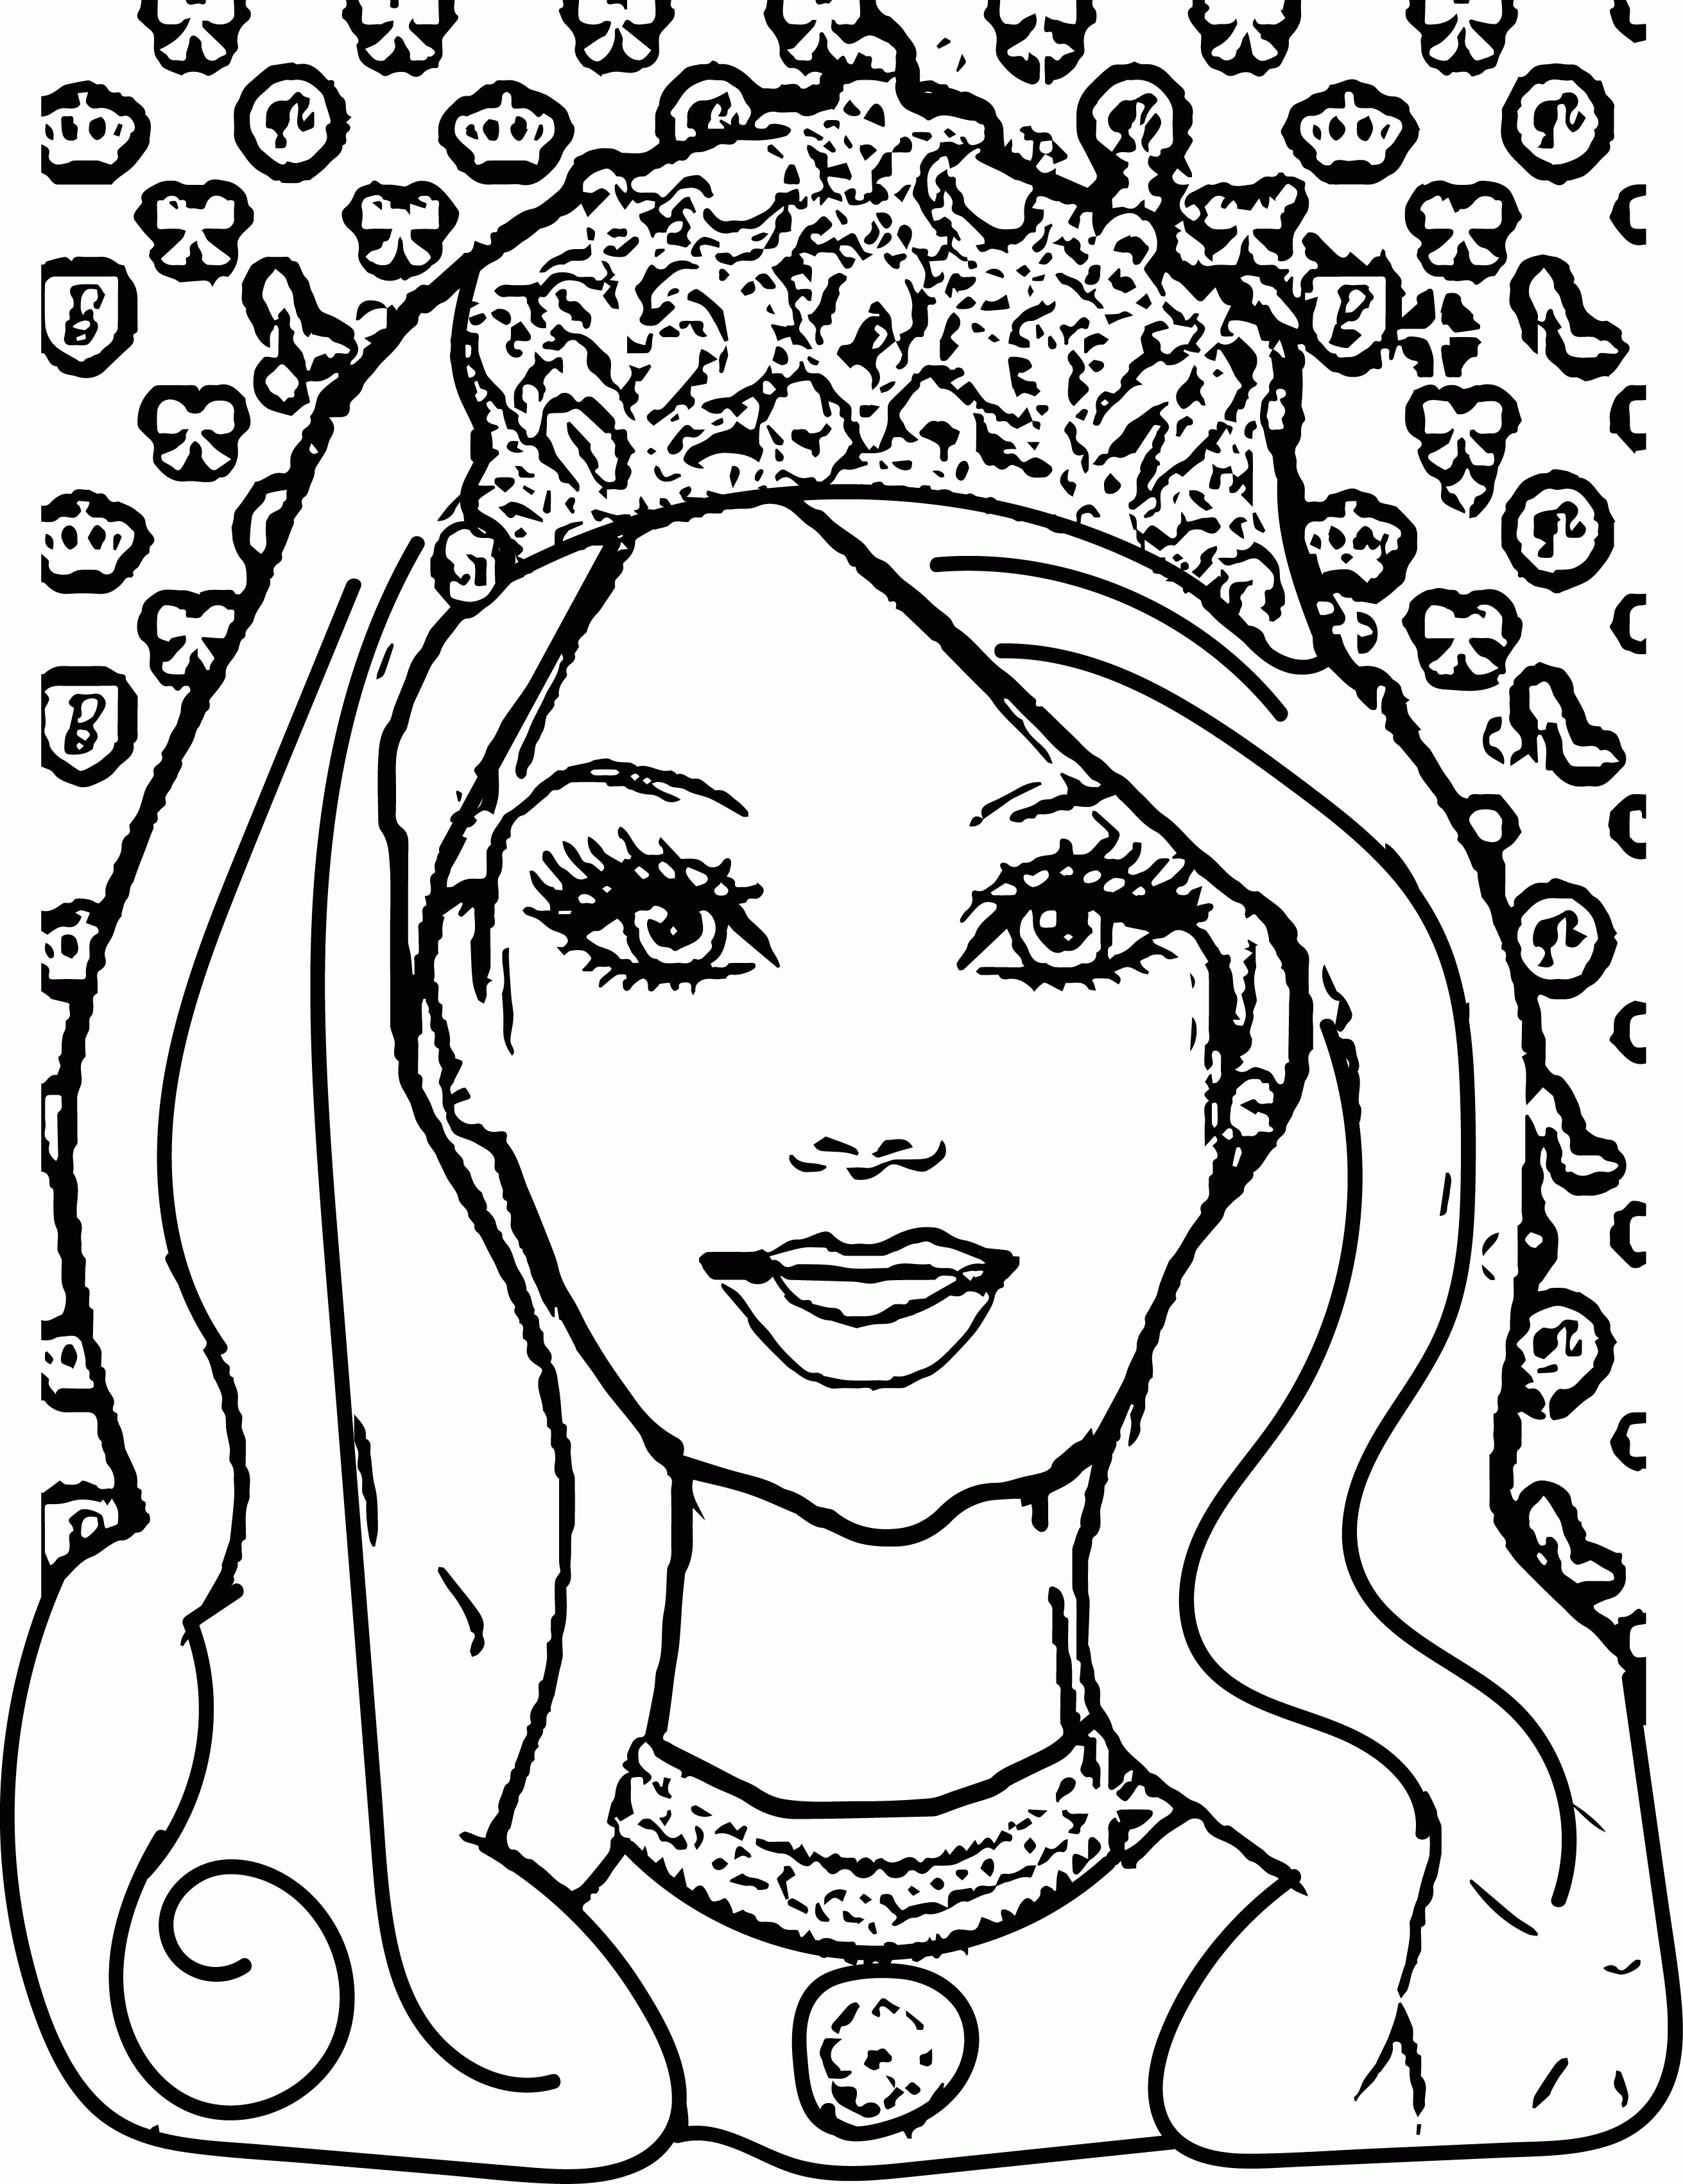 Barbie Coloring Pages | Wecoloringpage